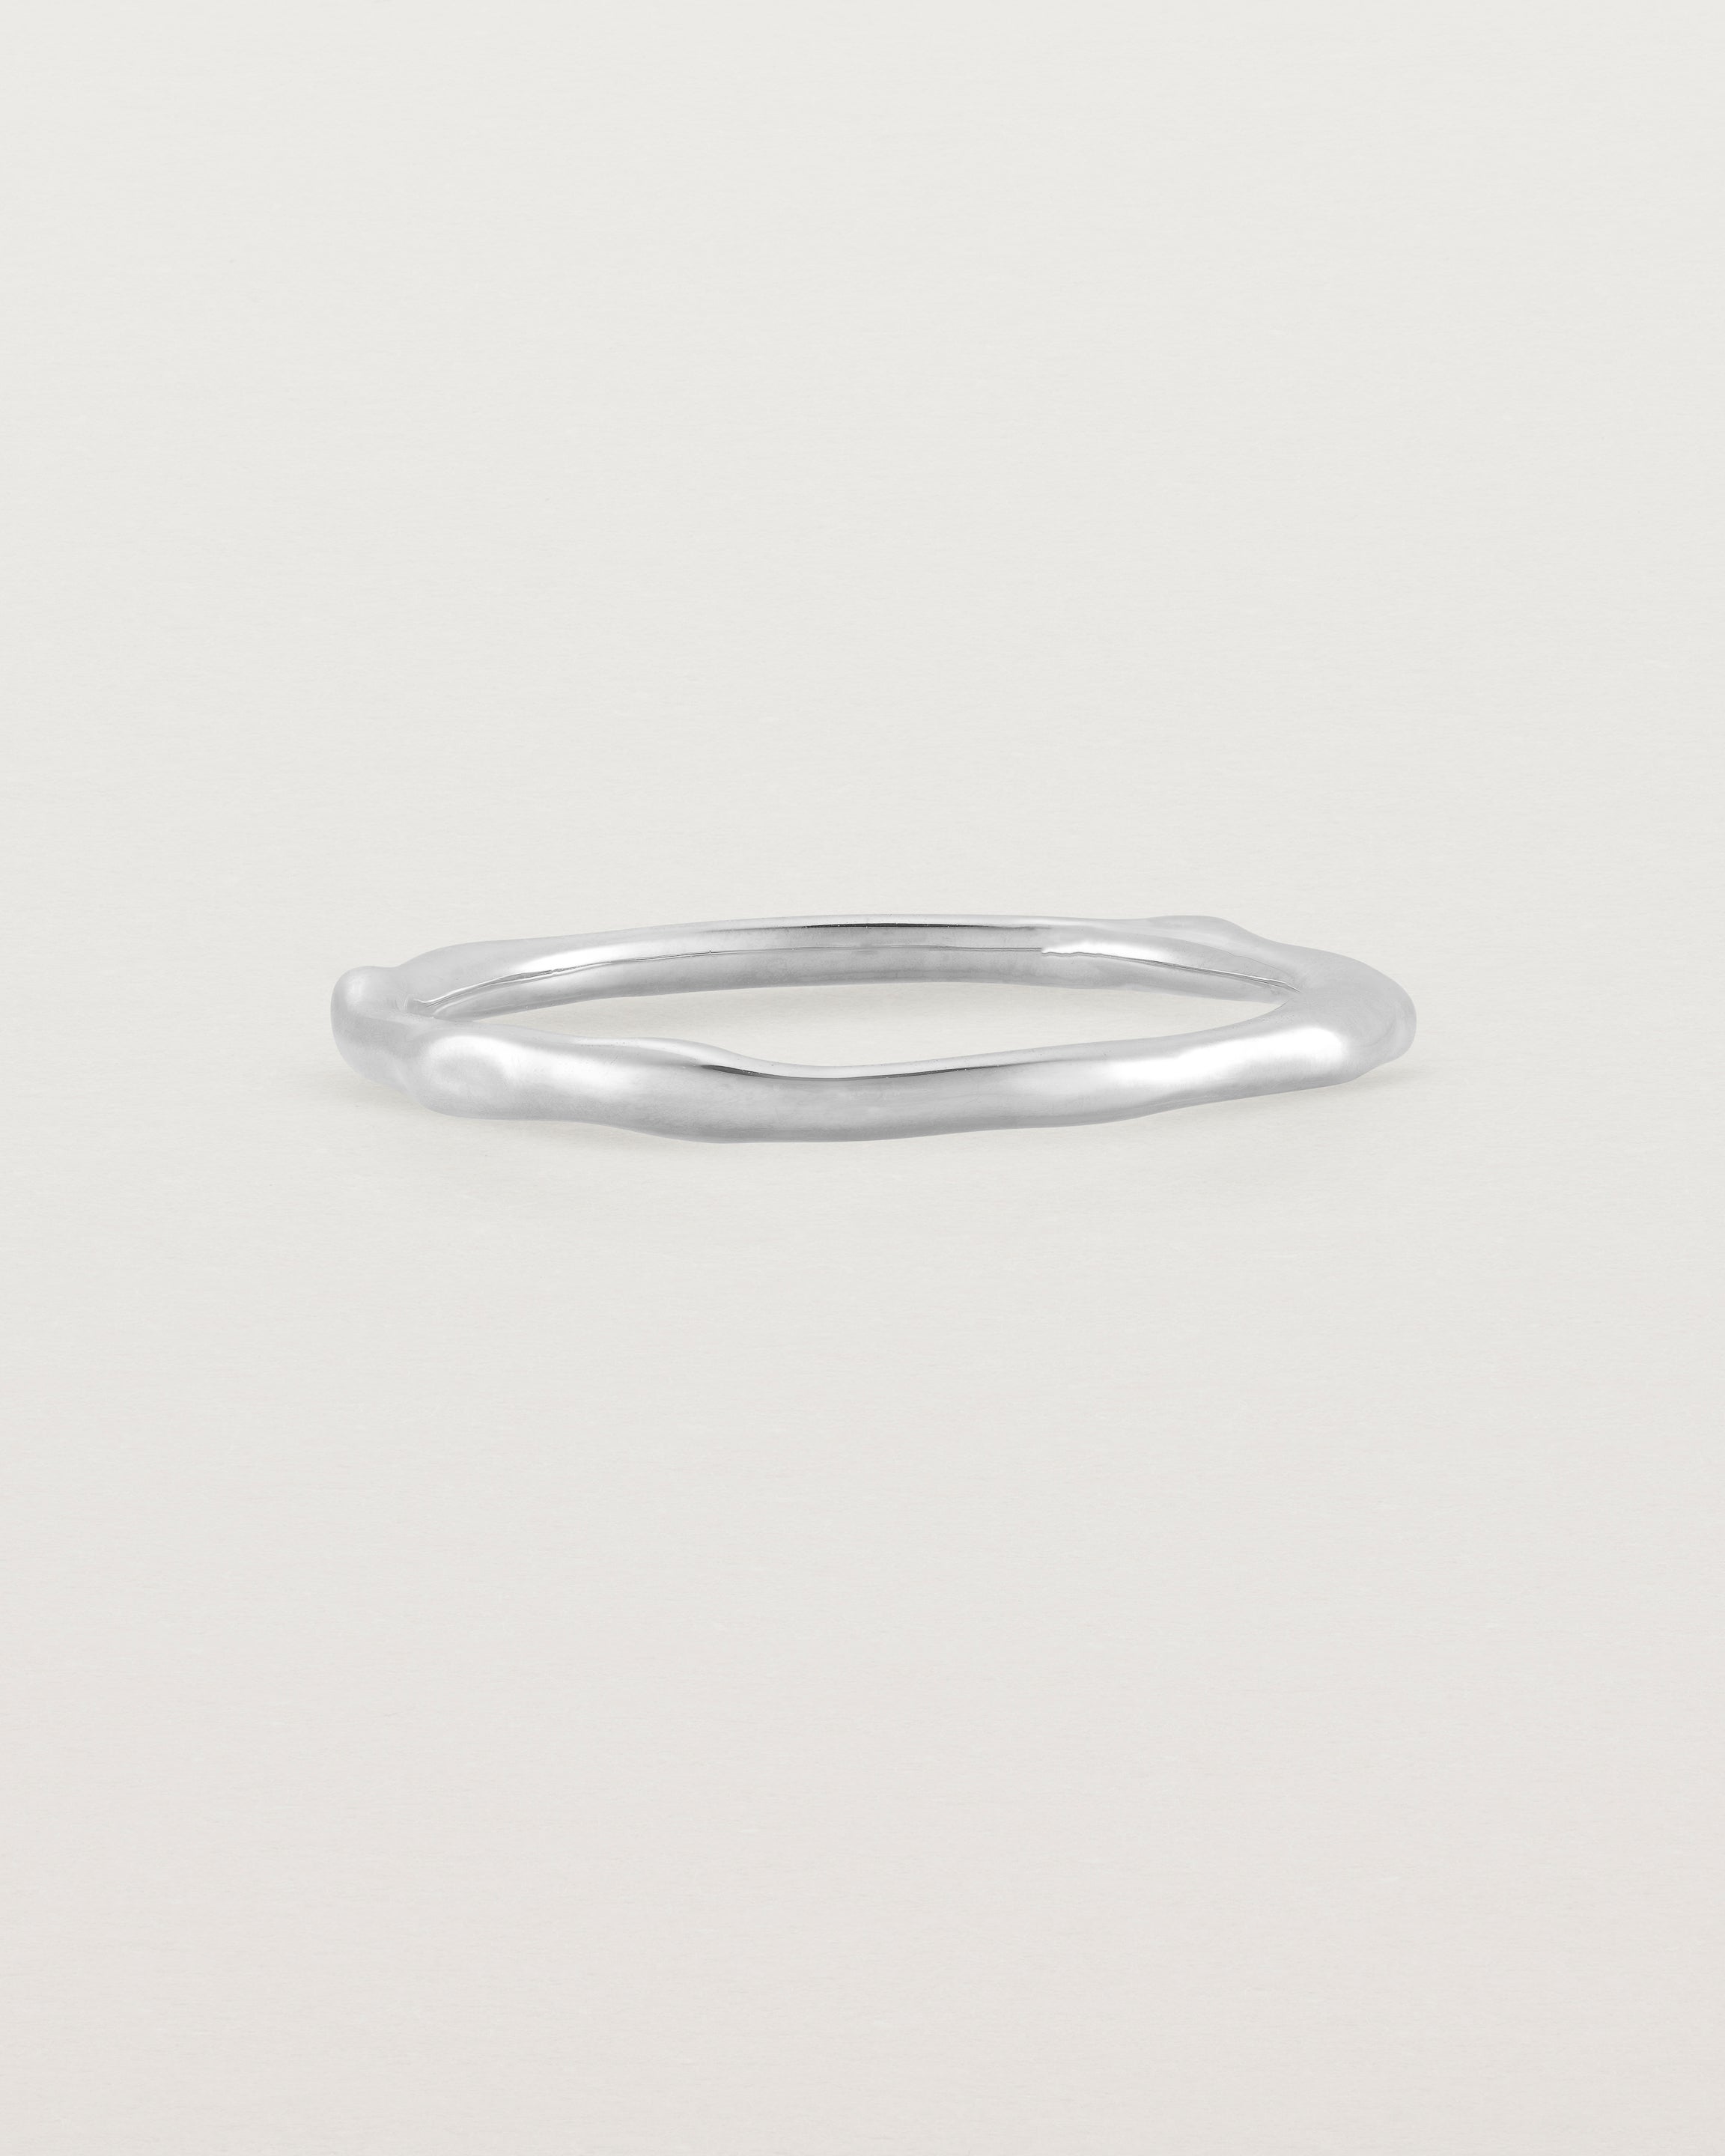 Front view of the Organic Stacking Ring in Sterling Silver.